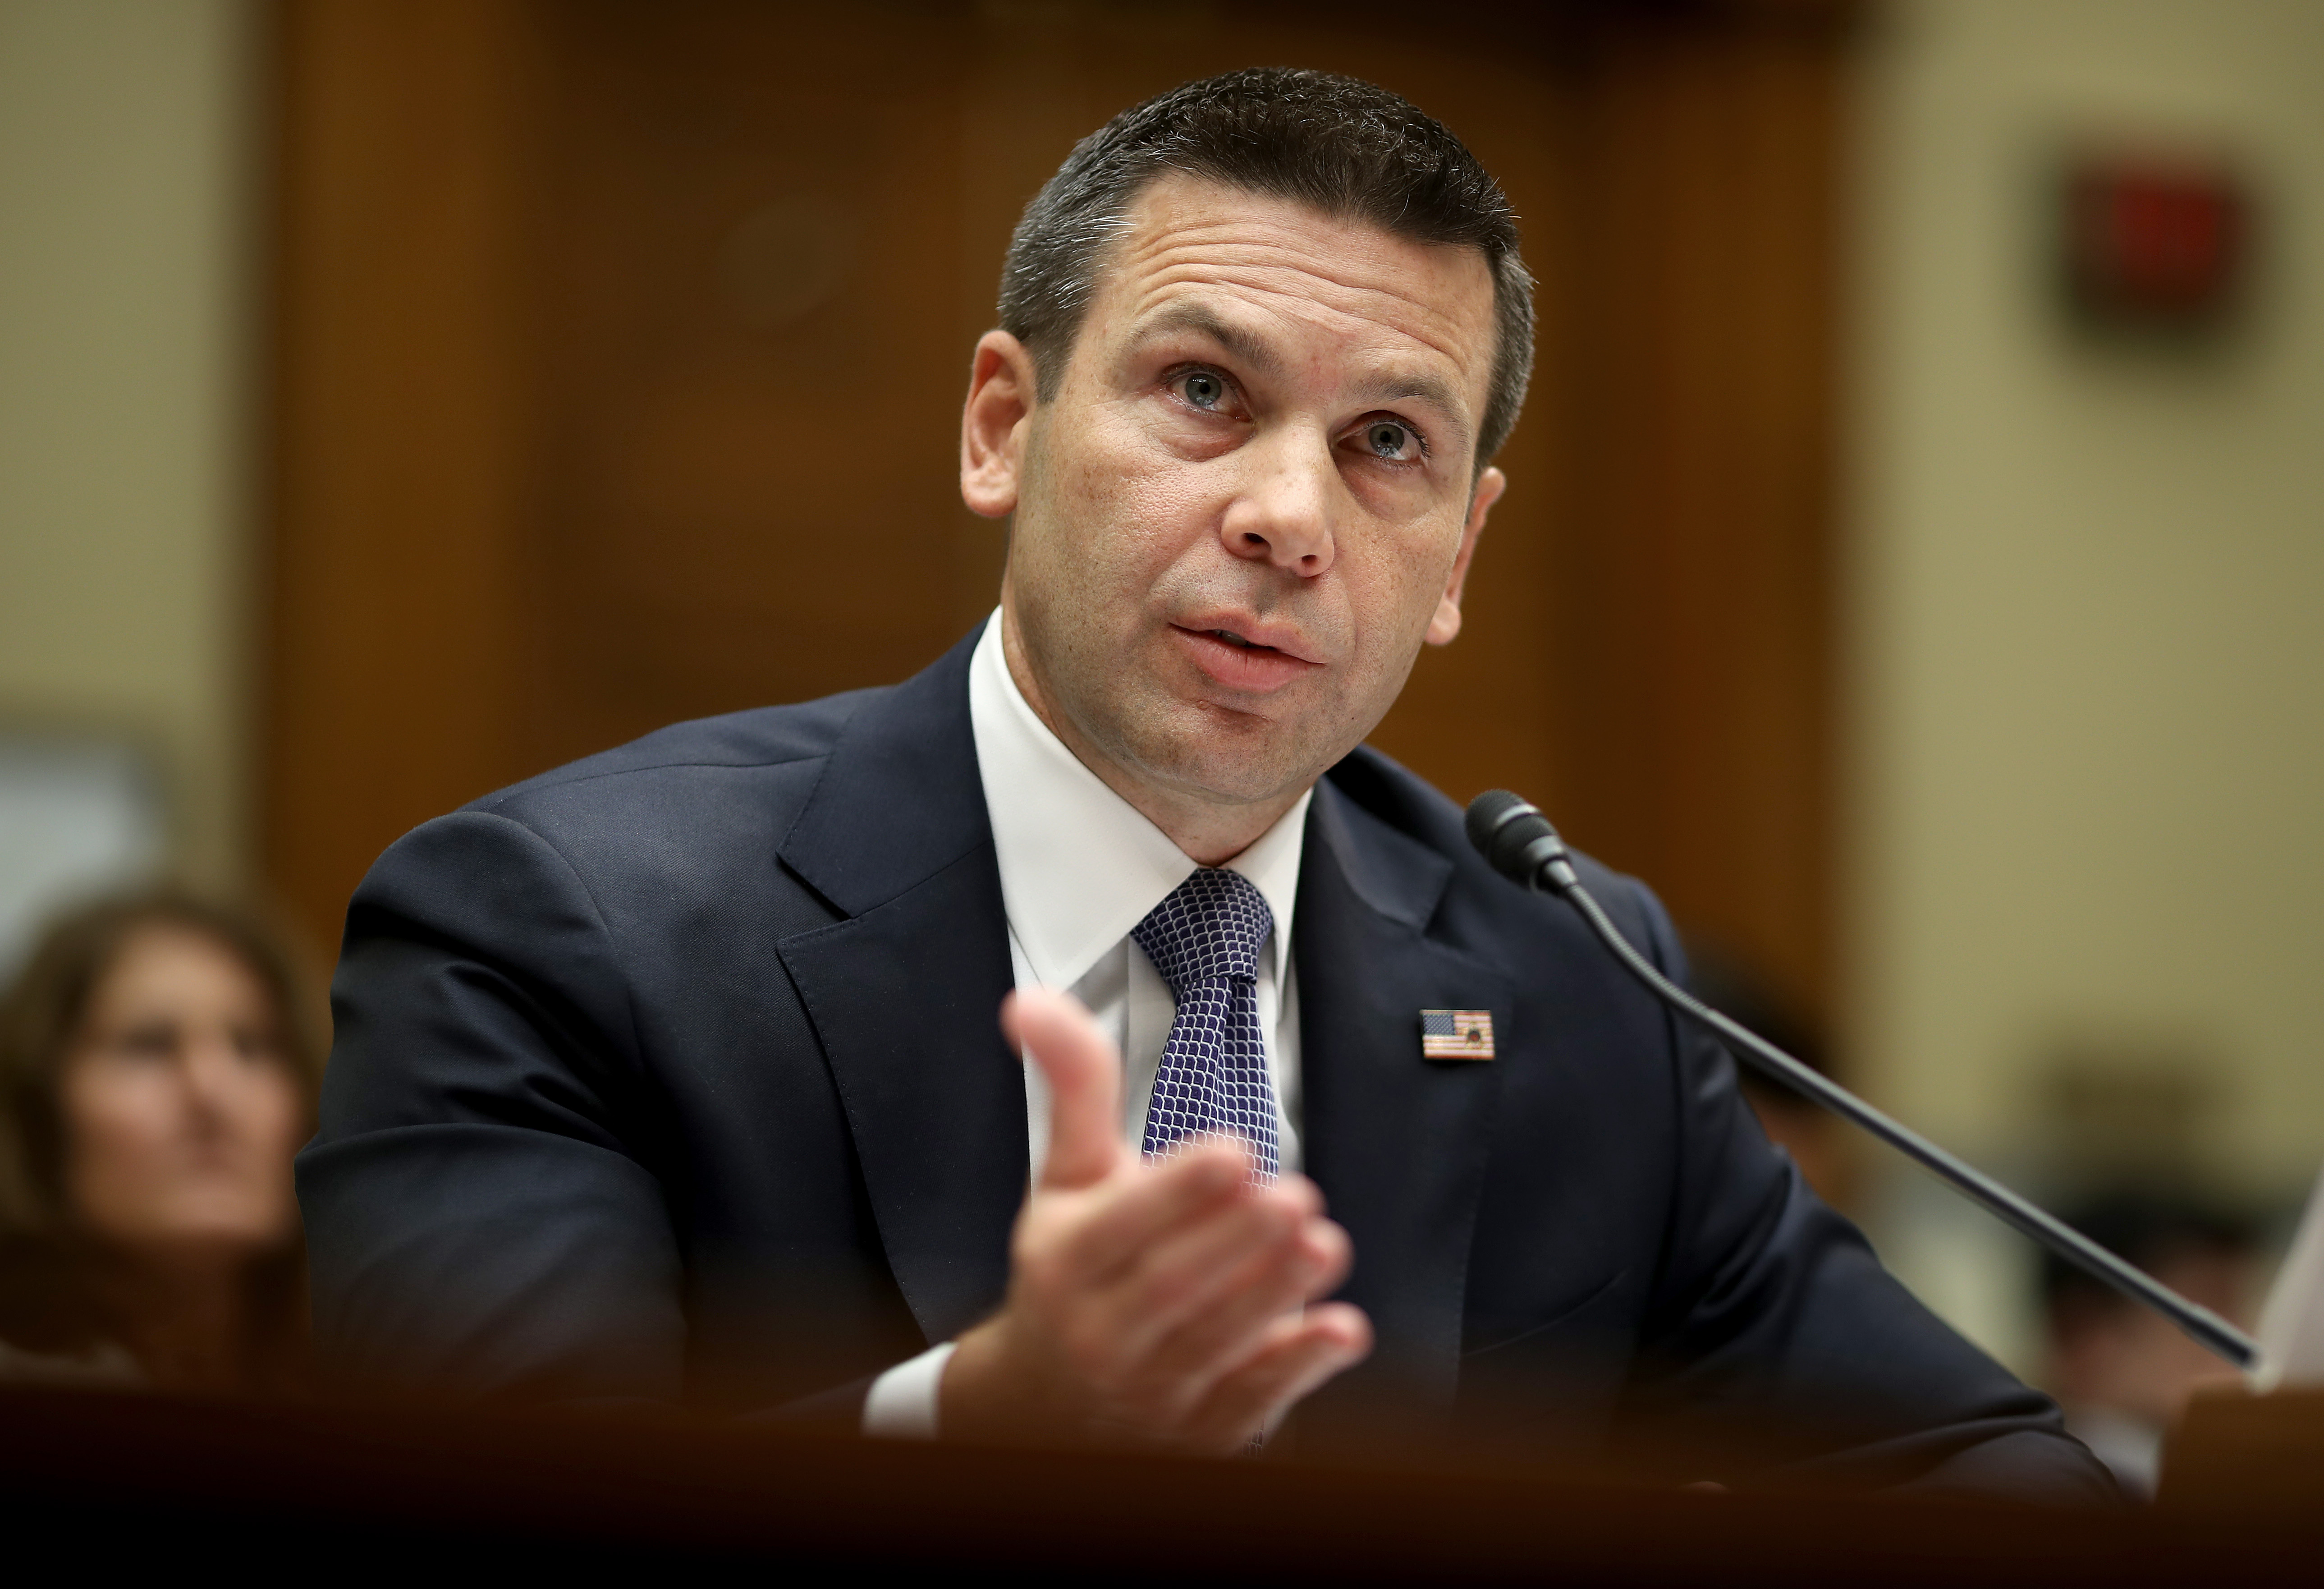 Acting Homeland Security Secretary Kevin McAleenan Testifies To The House On The Trump Administration's Child Separation Policy